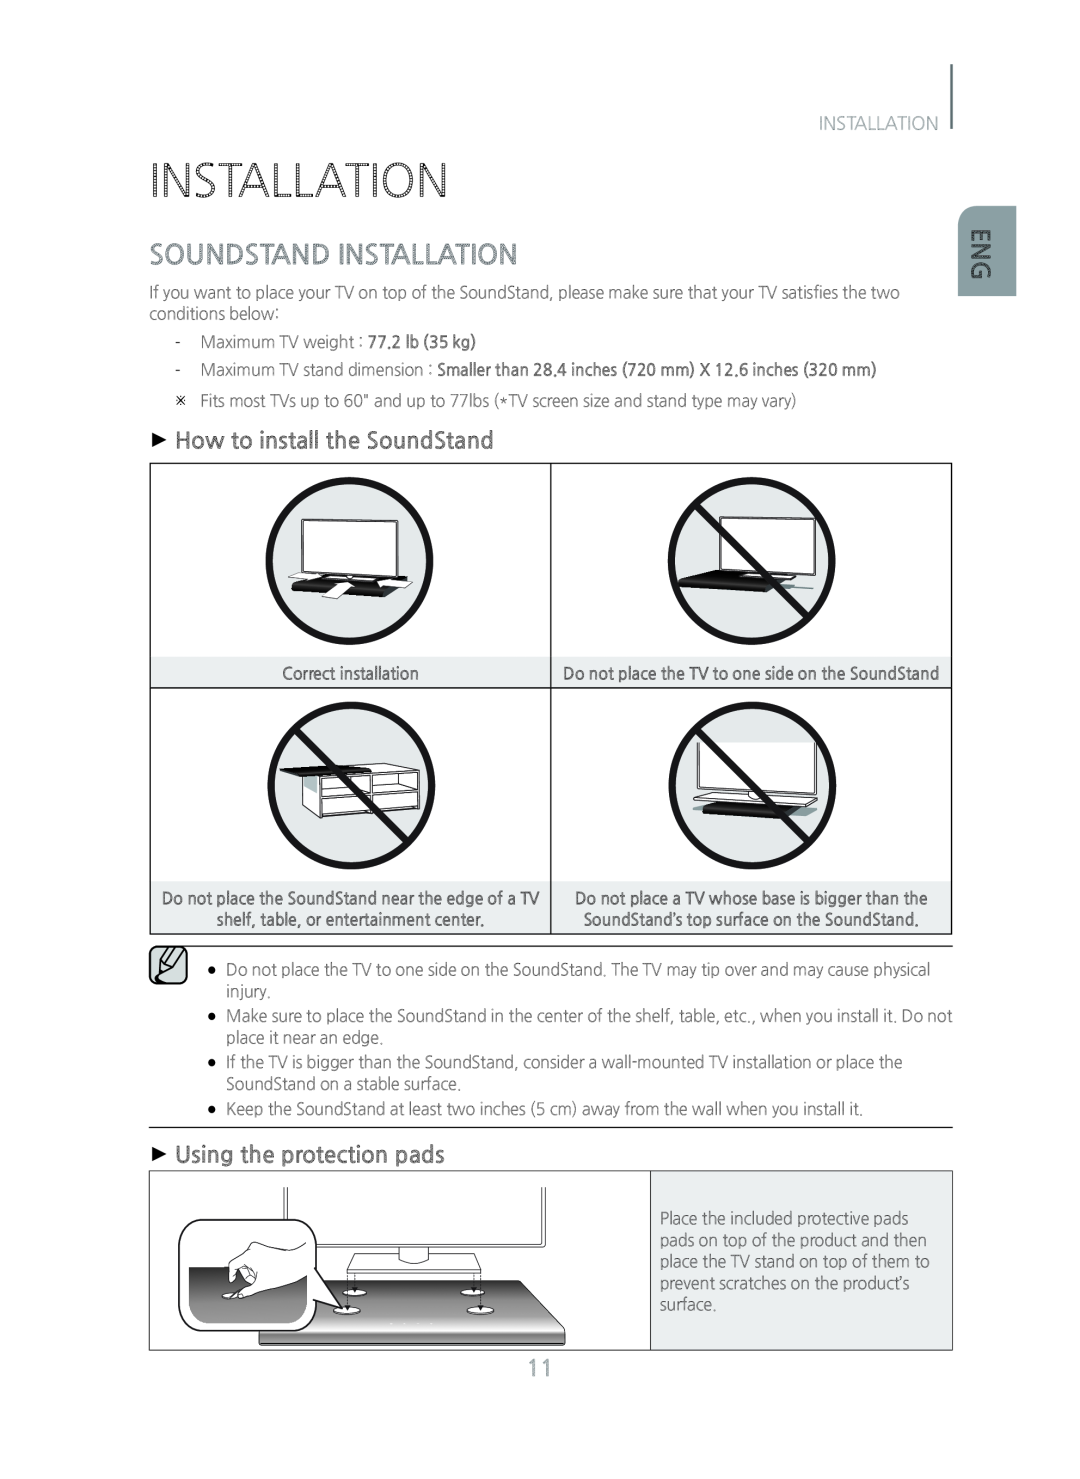 Samsung HW-H600/ZA manual Soundstand Installation, +How to install the SoundStand, +Using the protection pads 